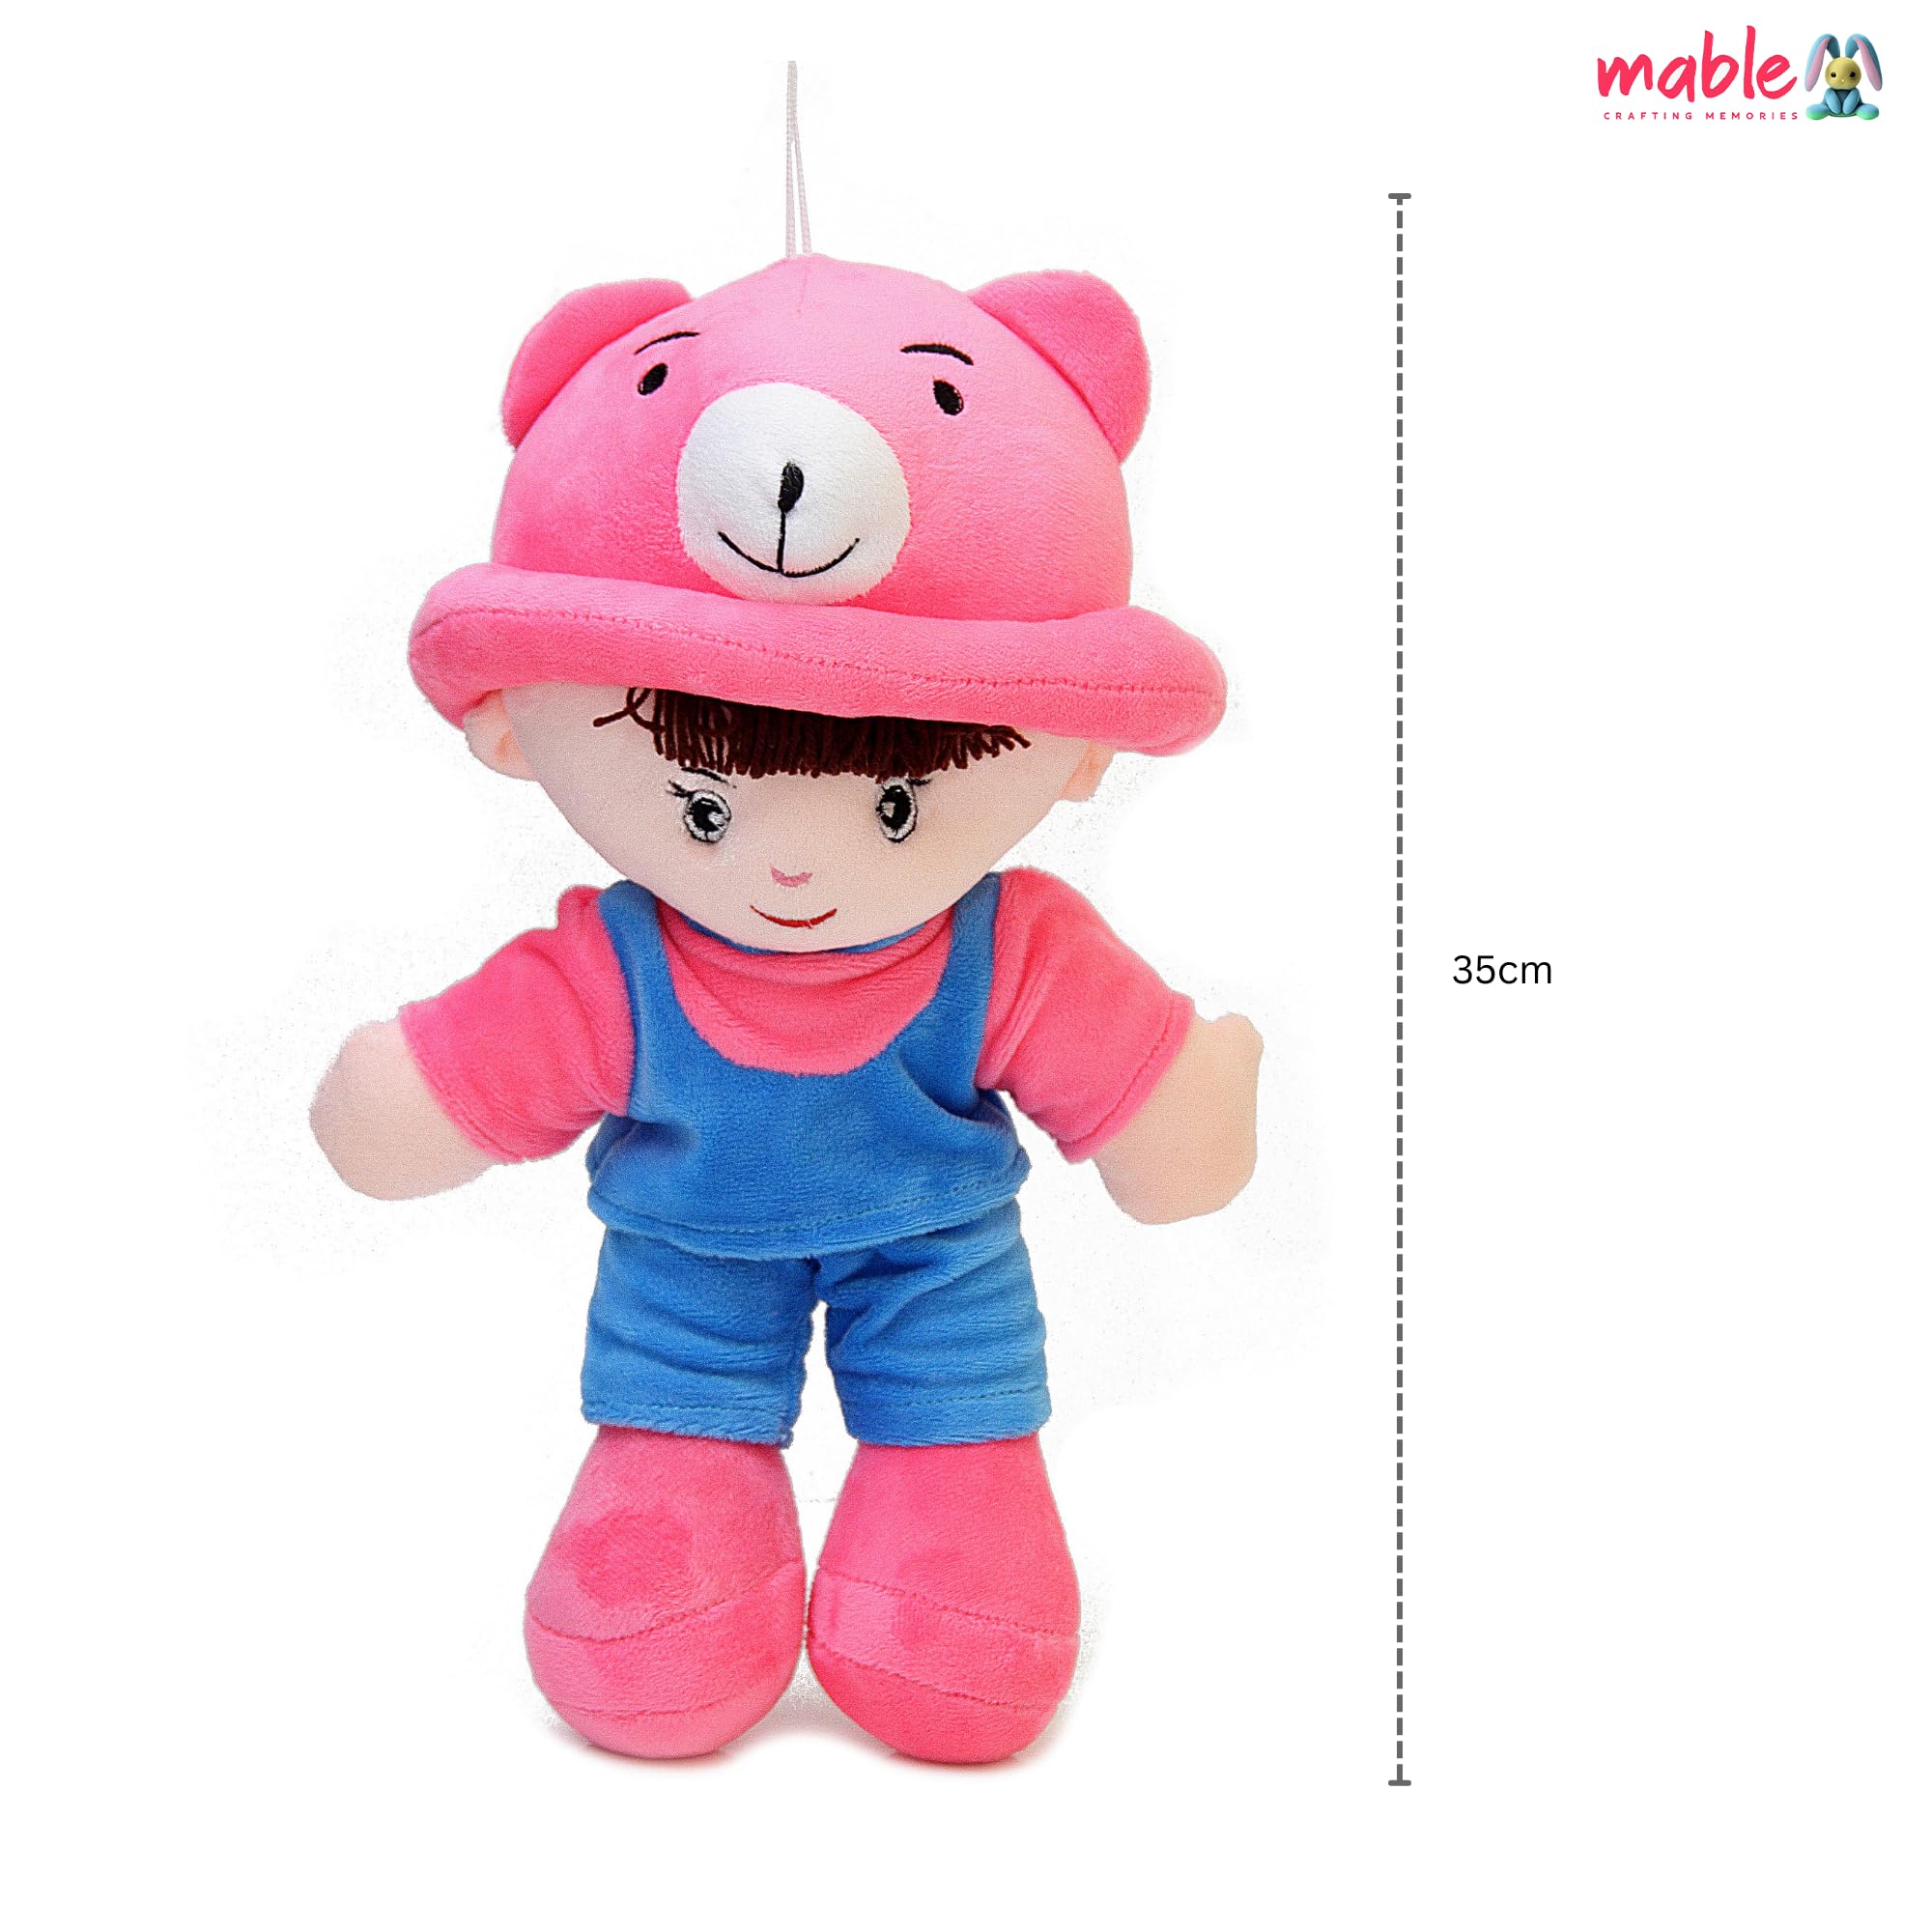 Addie Boy Rag Doll for Kids Huggable & Adorable Plush for Toddlers | Baby Doll with Hat for Boys and Girls | Soft and Cuddly Stuffed Toy for Babies | Made in India (Rani, 35cm)